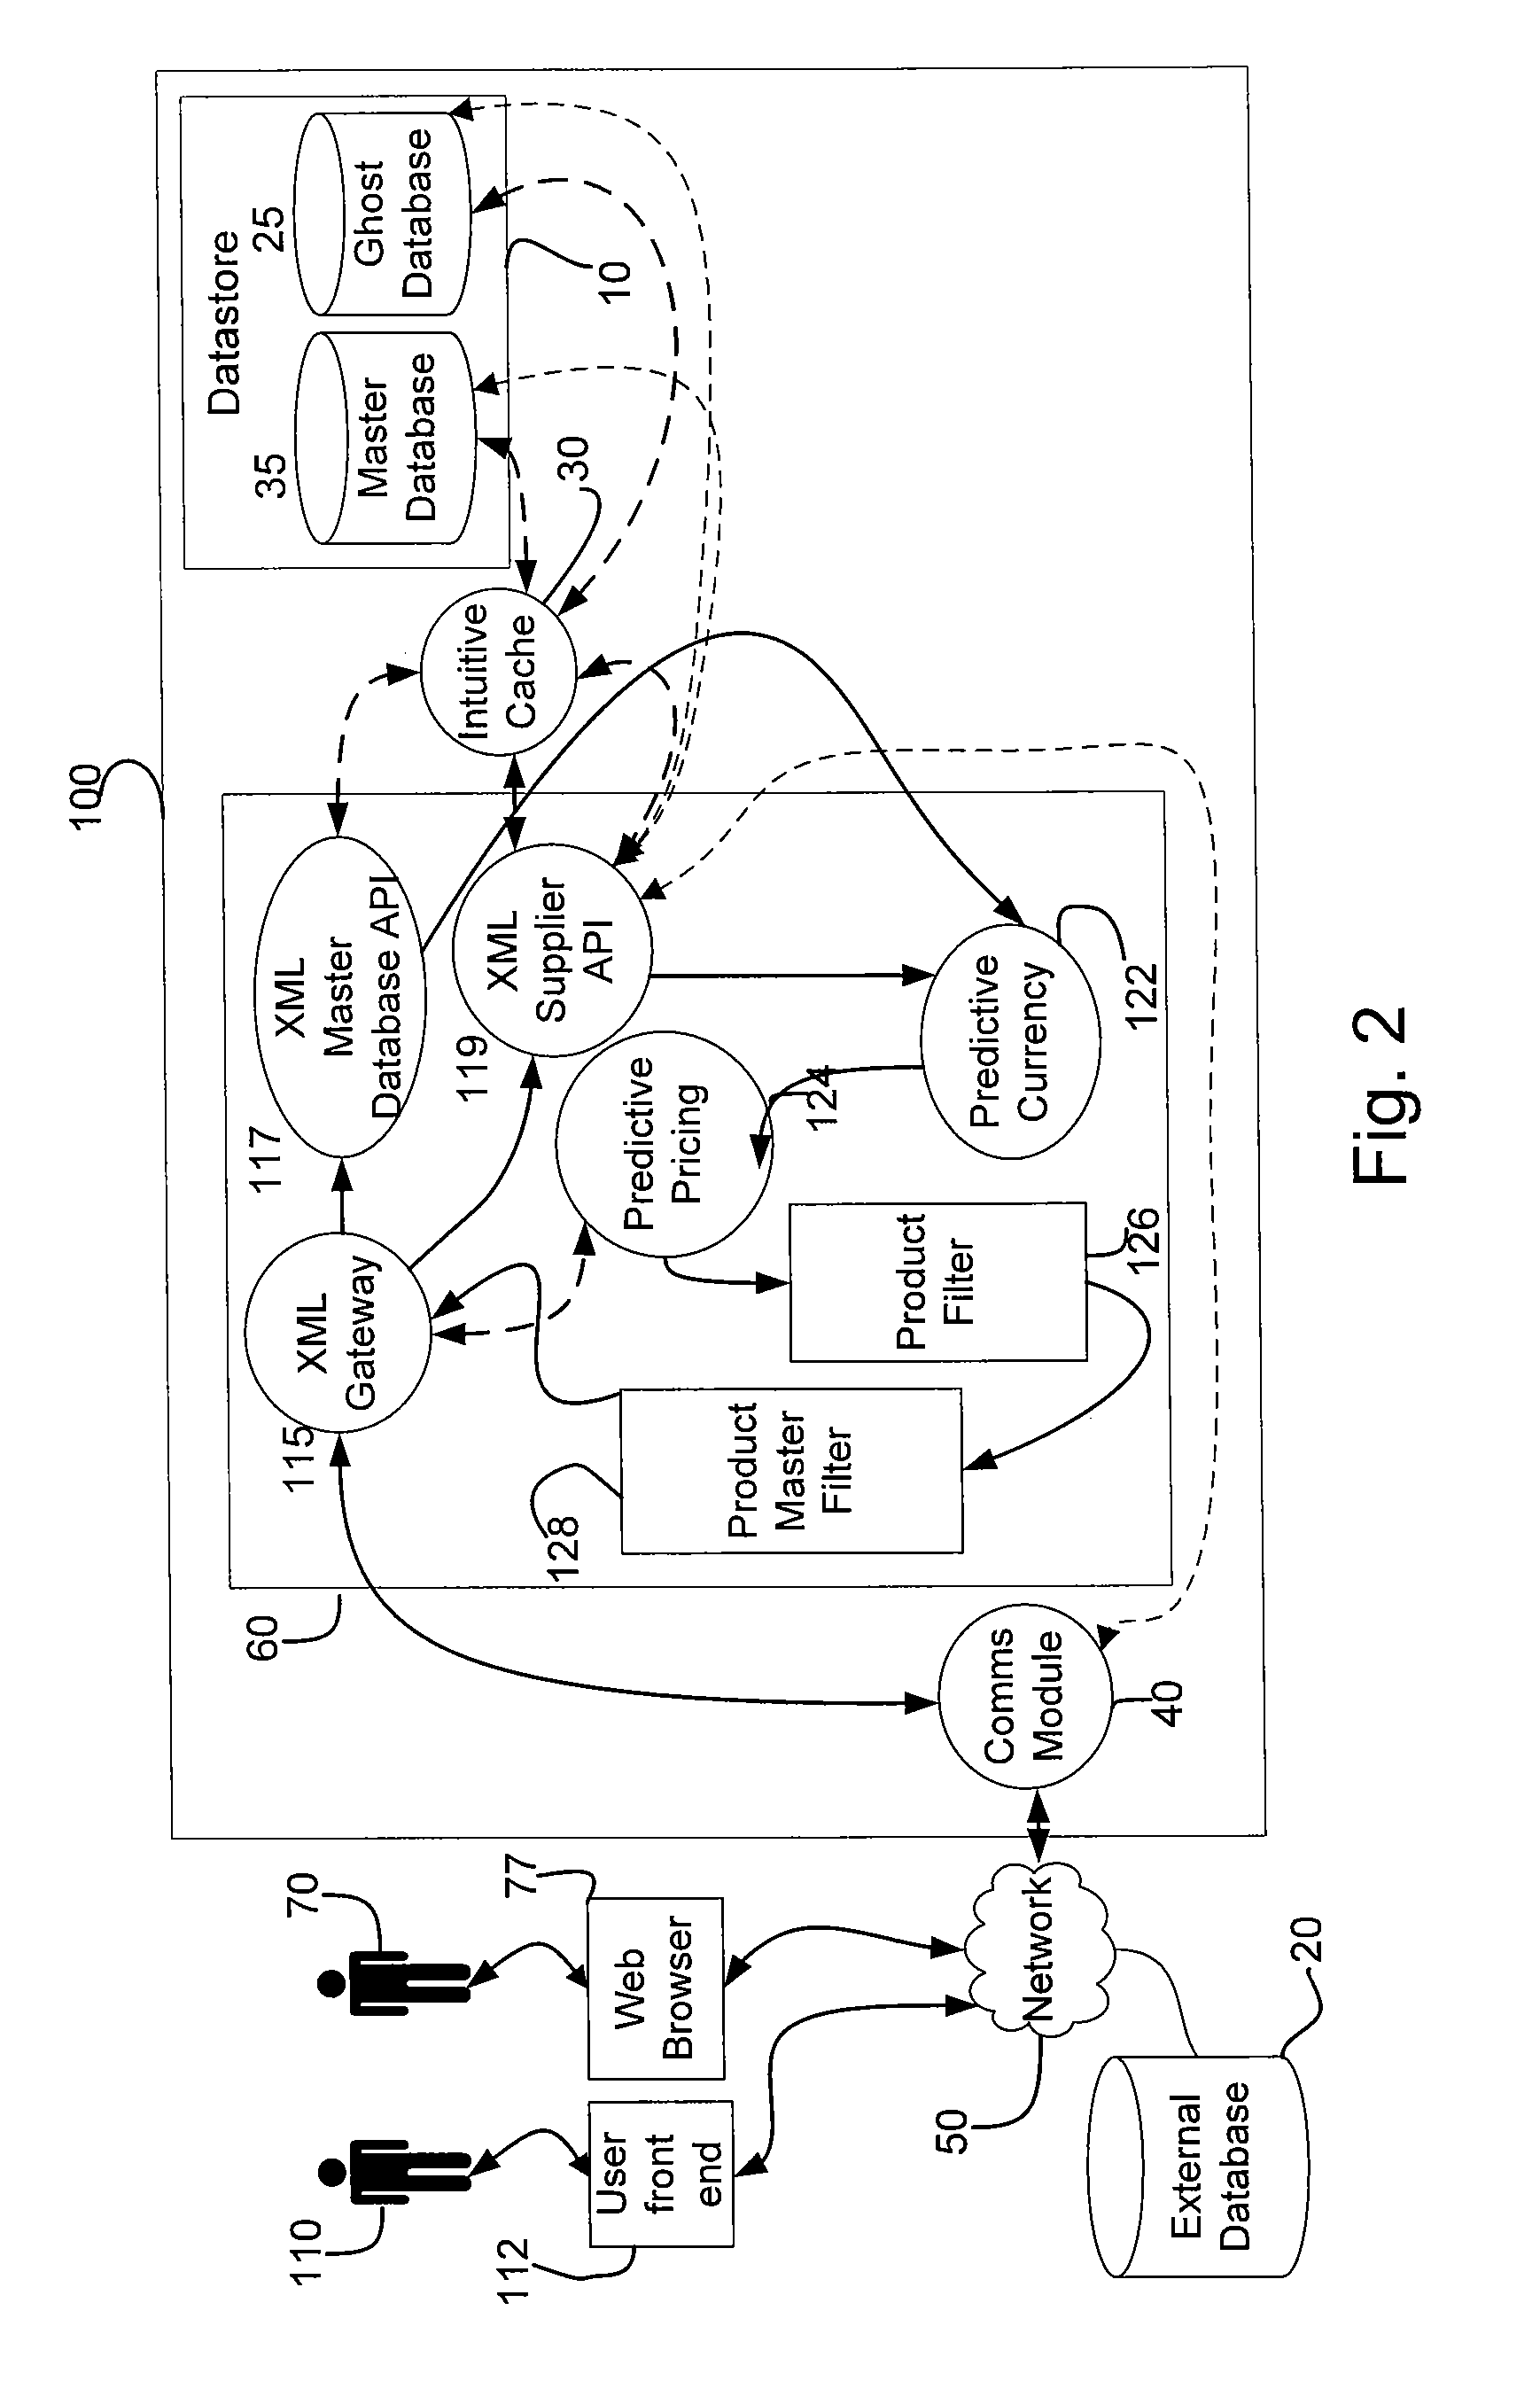 Internet mediated booking and distribution system